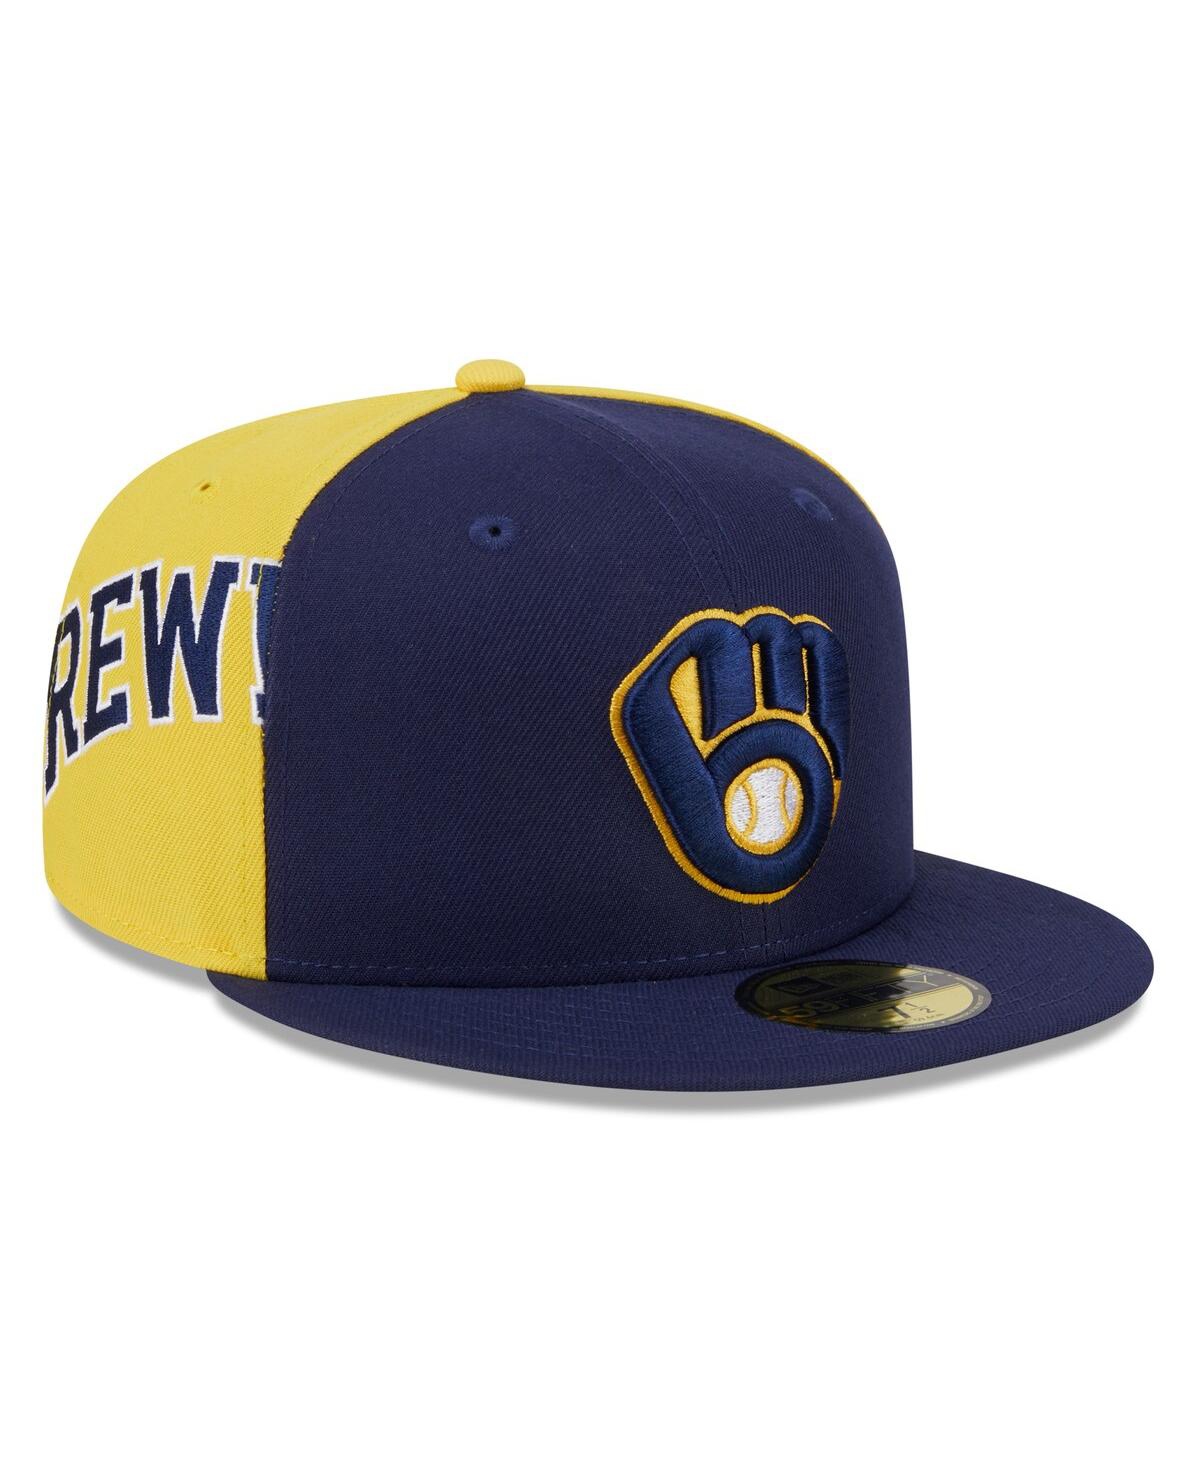 Men's Navy/Gold Milwaukee Brewers Gameday Sideswipe 59Fifty Fitted Hat - Navy Gold